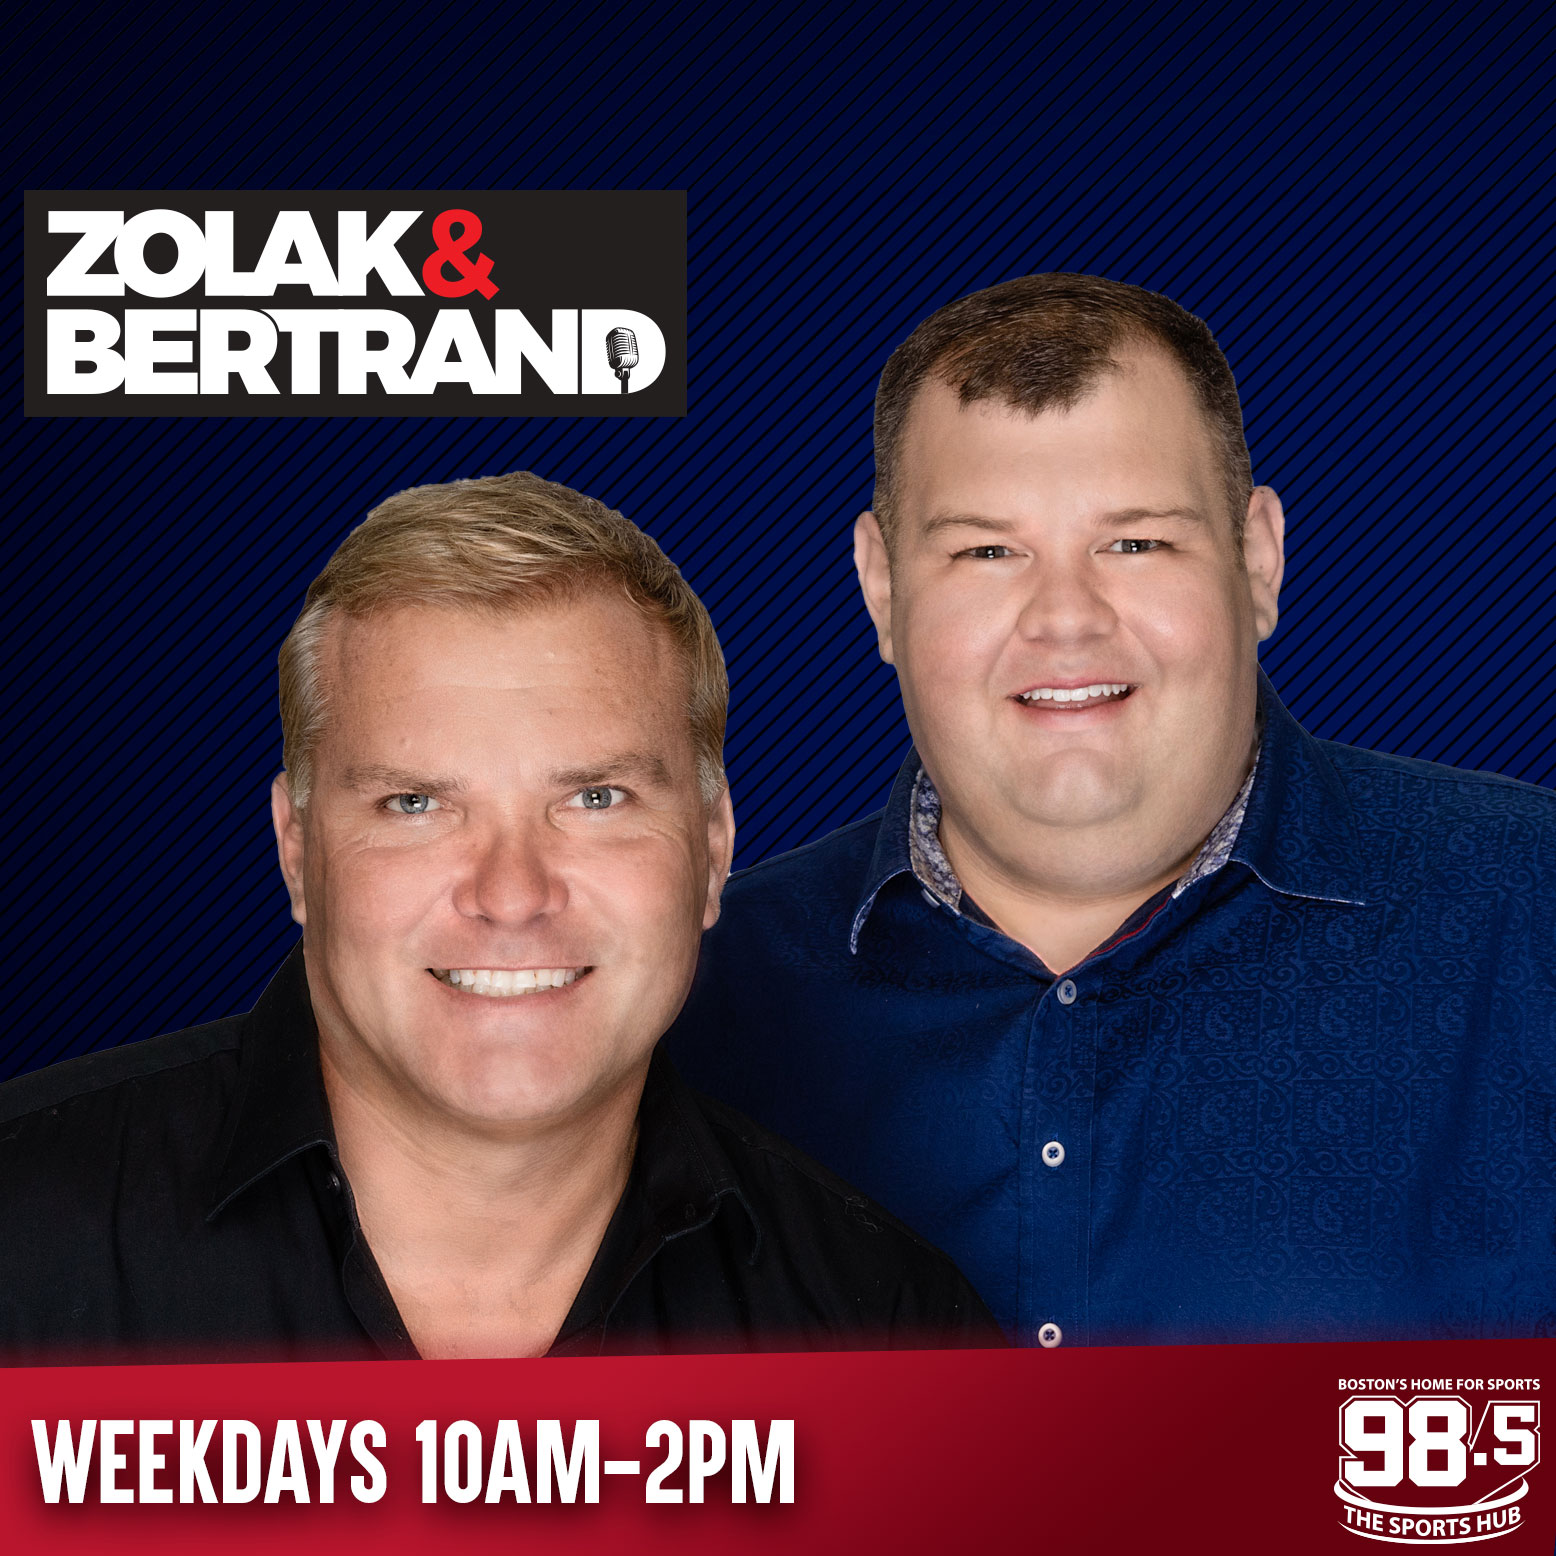 Zolak & Bertrand: Loss to Commanders could be final straw for Belichick